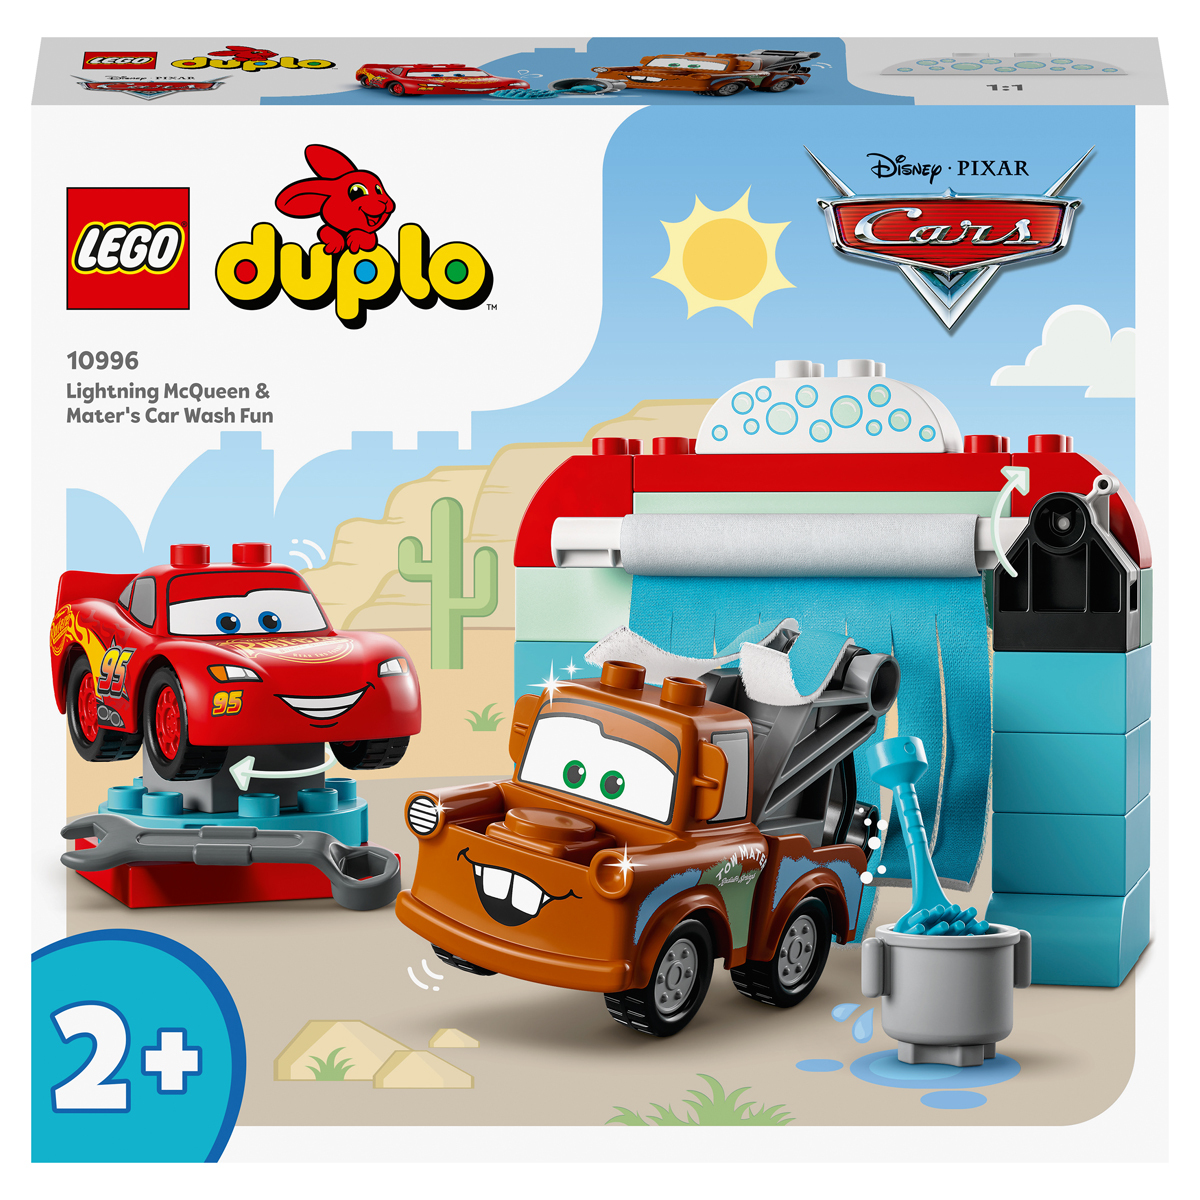 LEGO DUPLO Lightning & Mater's Wash Fun 10996 | The Entertainer